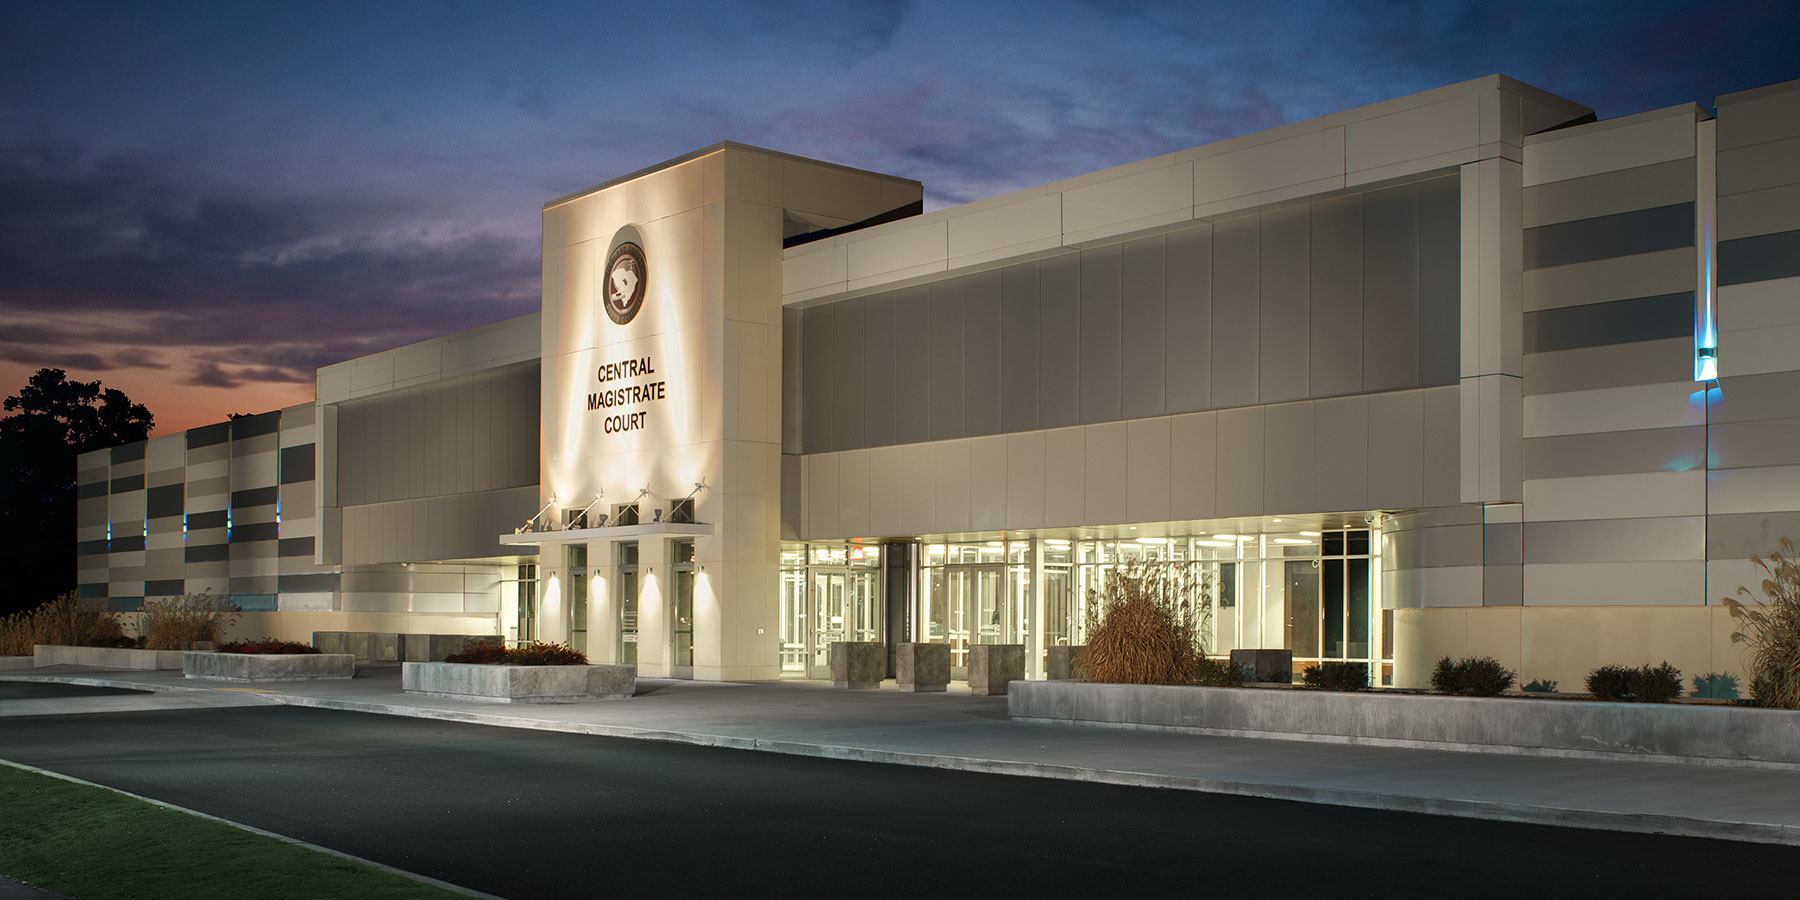 Boudreaux architects and interior designers worked with Richland County on the new Decker Blvd Courthouse.